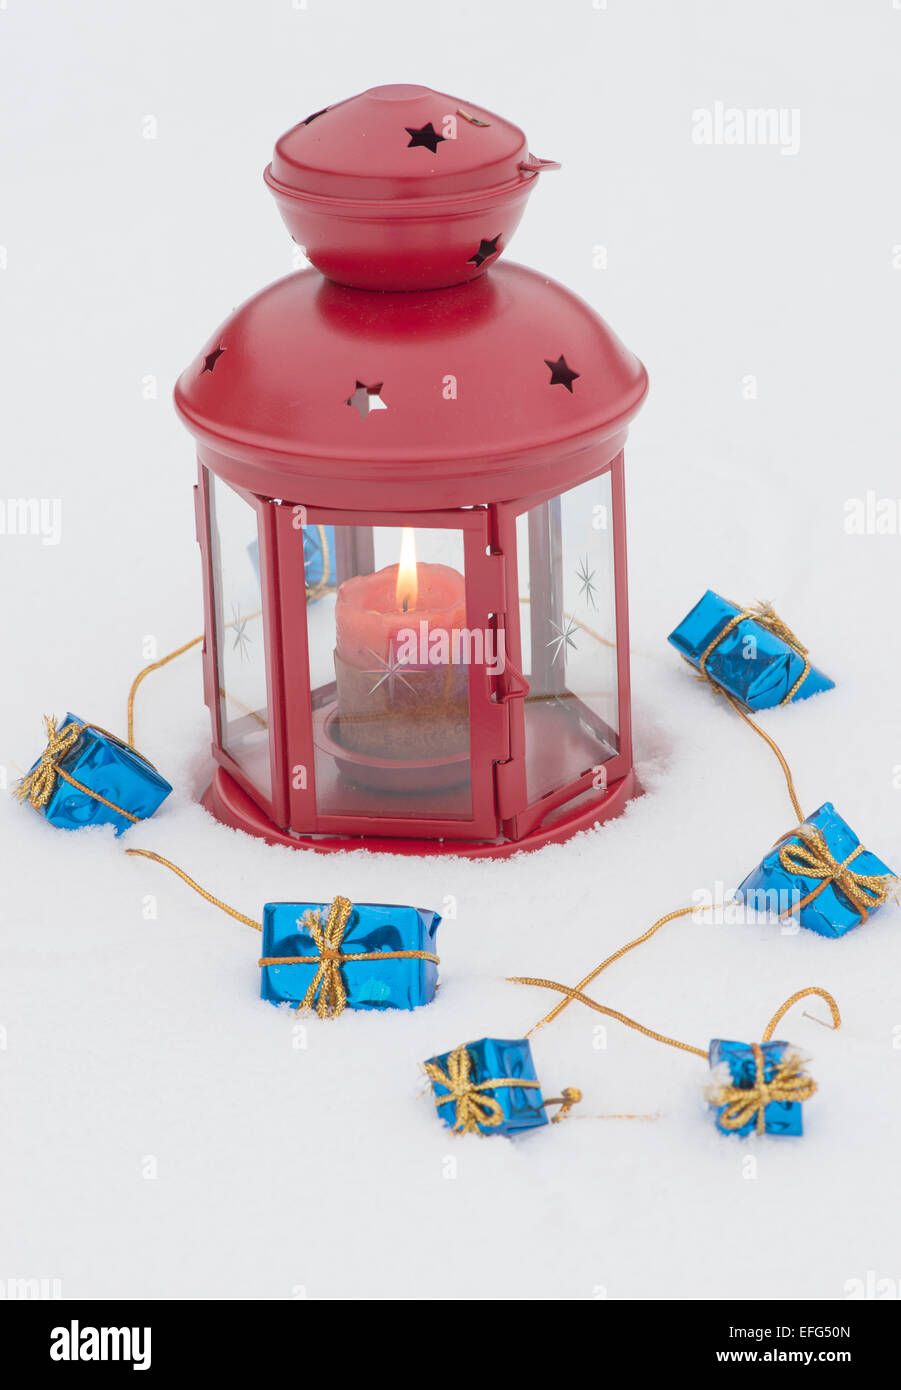 Lamp and little gifts on a snowy background Stock Photo